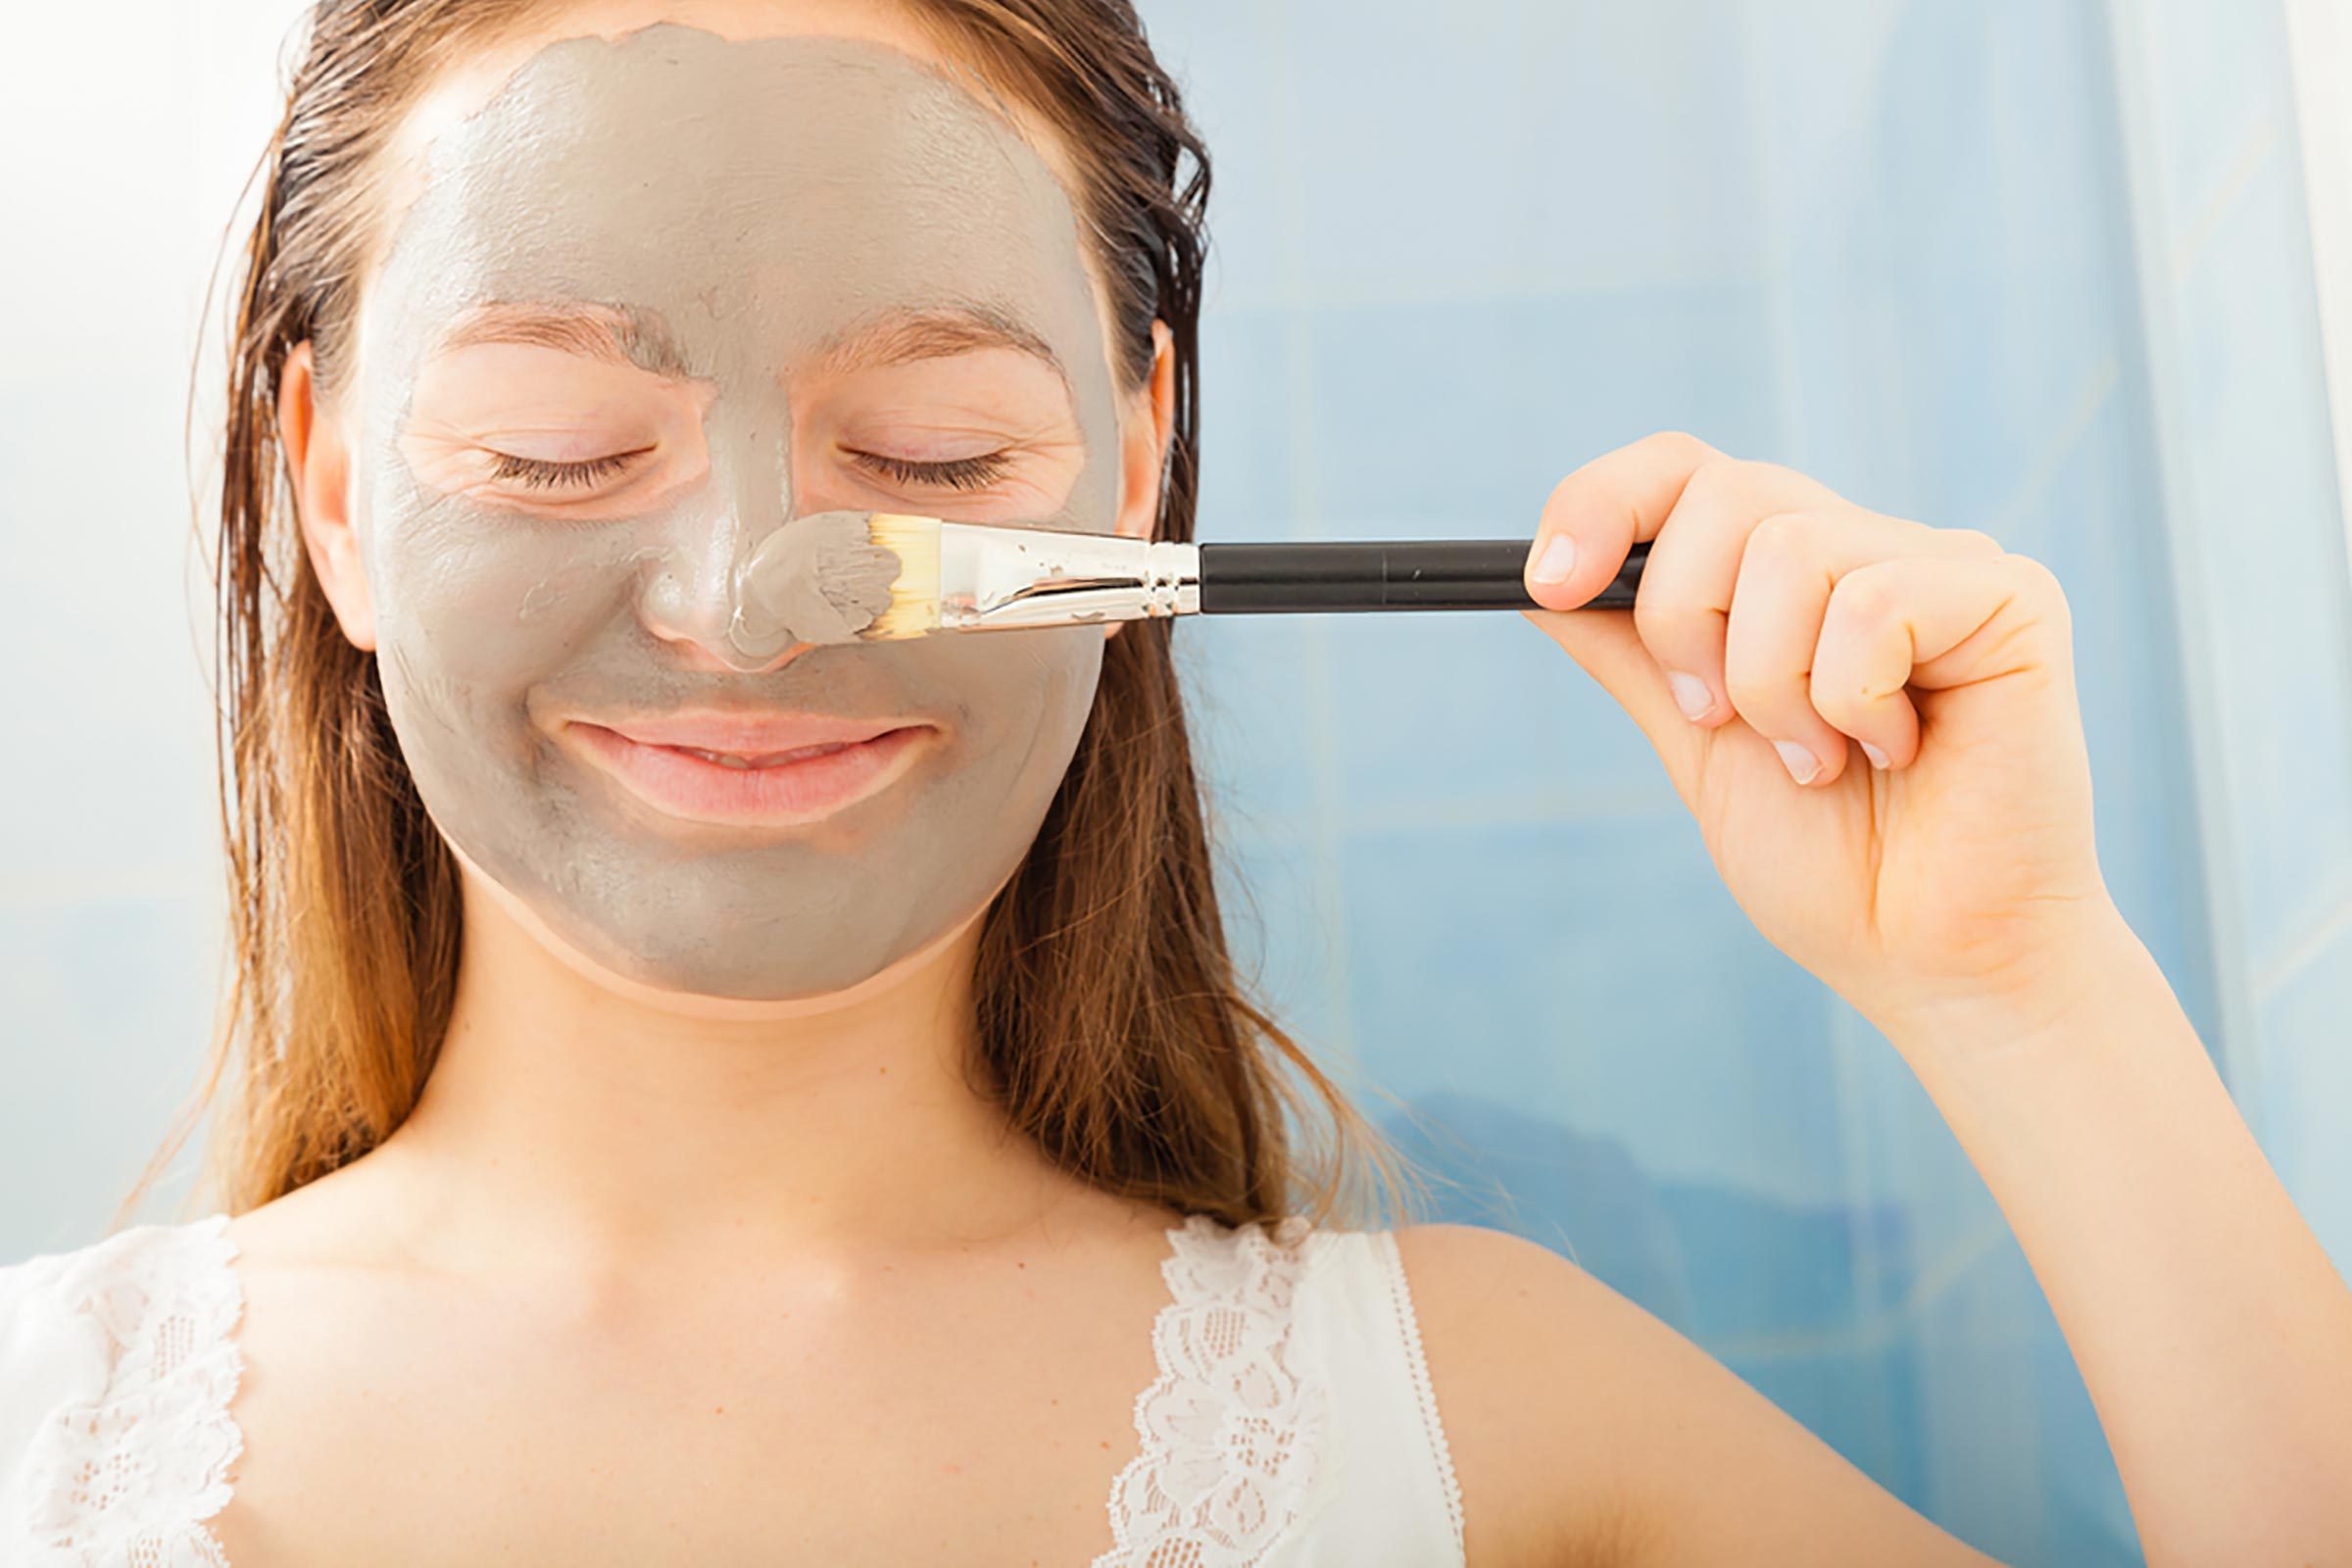 9 DIY Facial Treatments You Can Safely Do at Home The Healthy